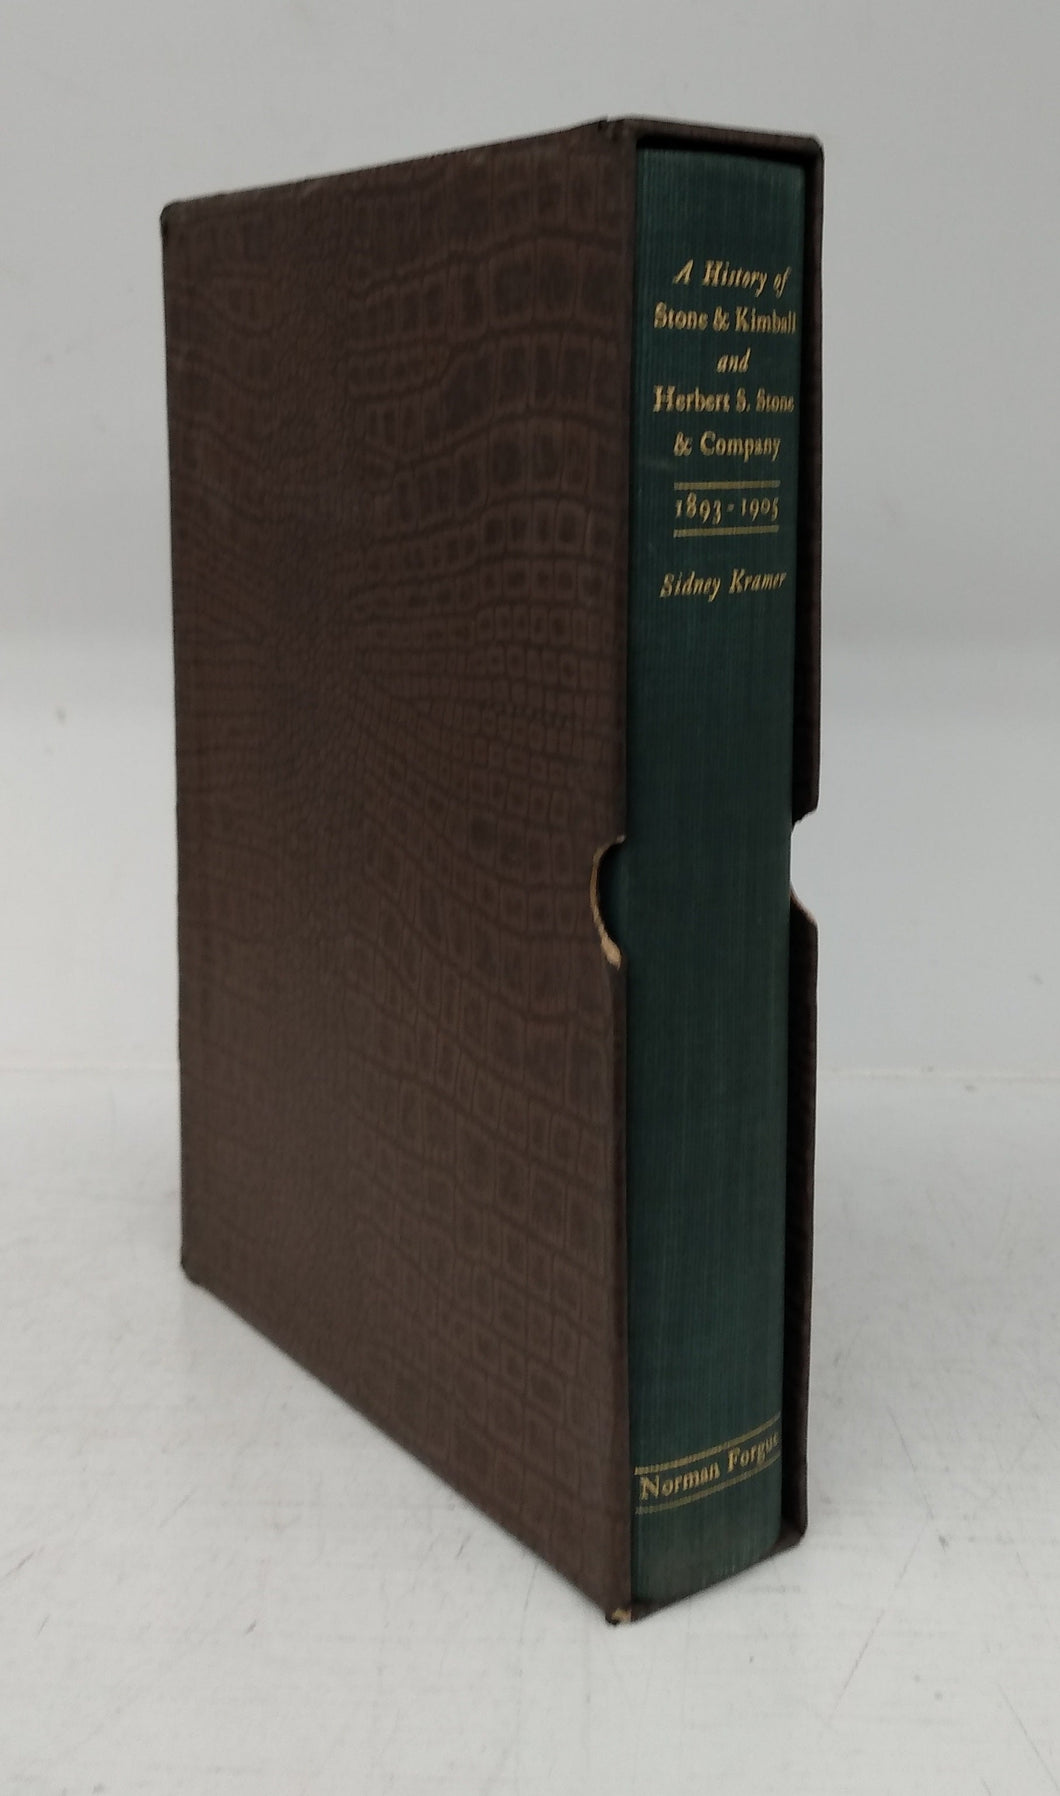 A History of Stone & Kimball and Herbert S. Stone & Co. with a Bibliograpy of Their Publications 1893-1905